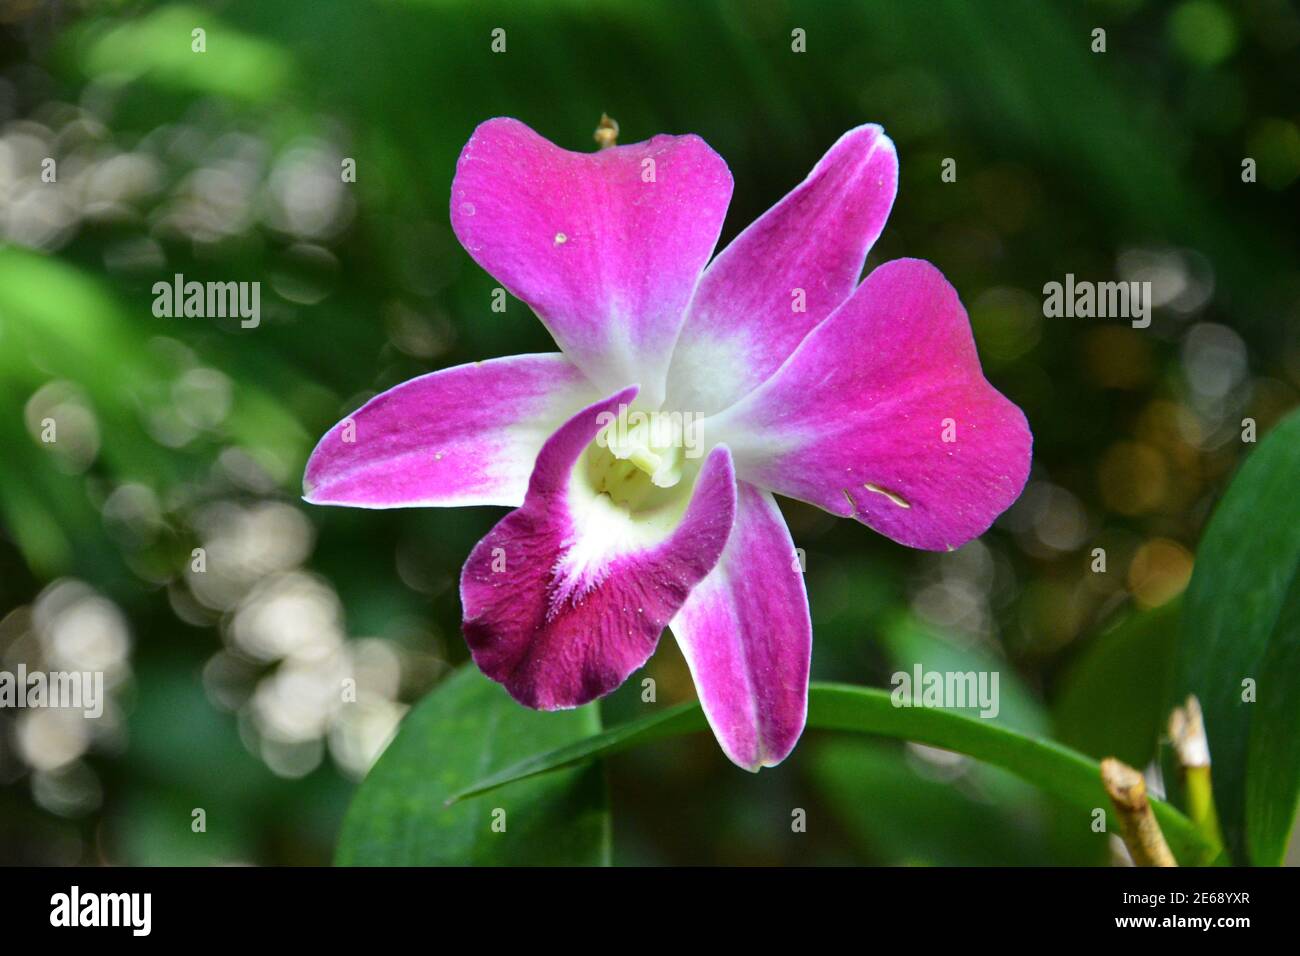 one pink phalaenopsis blossoms with white stamens in the garden Stock Photo